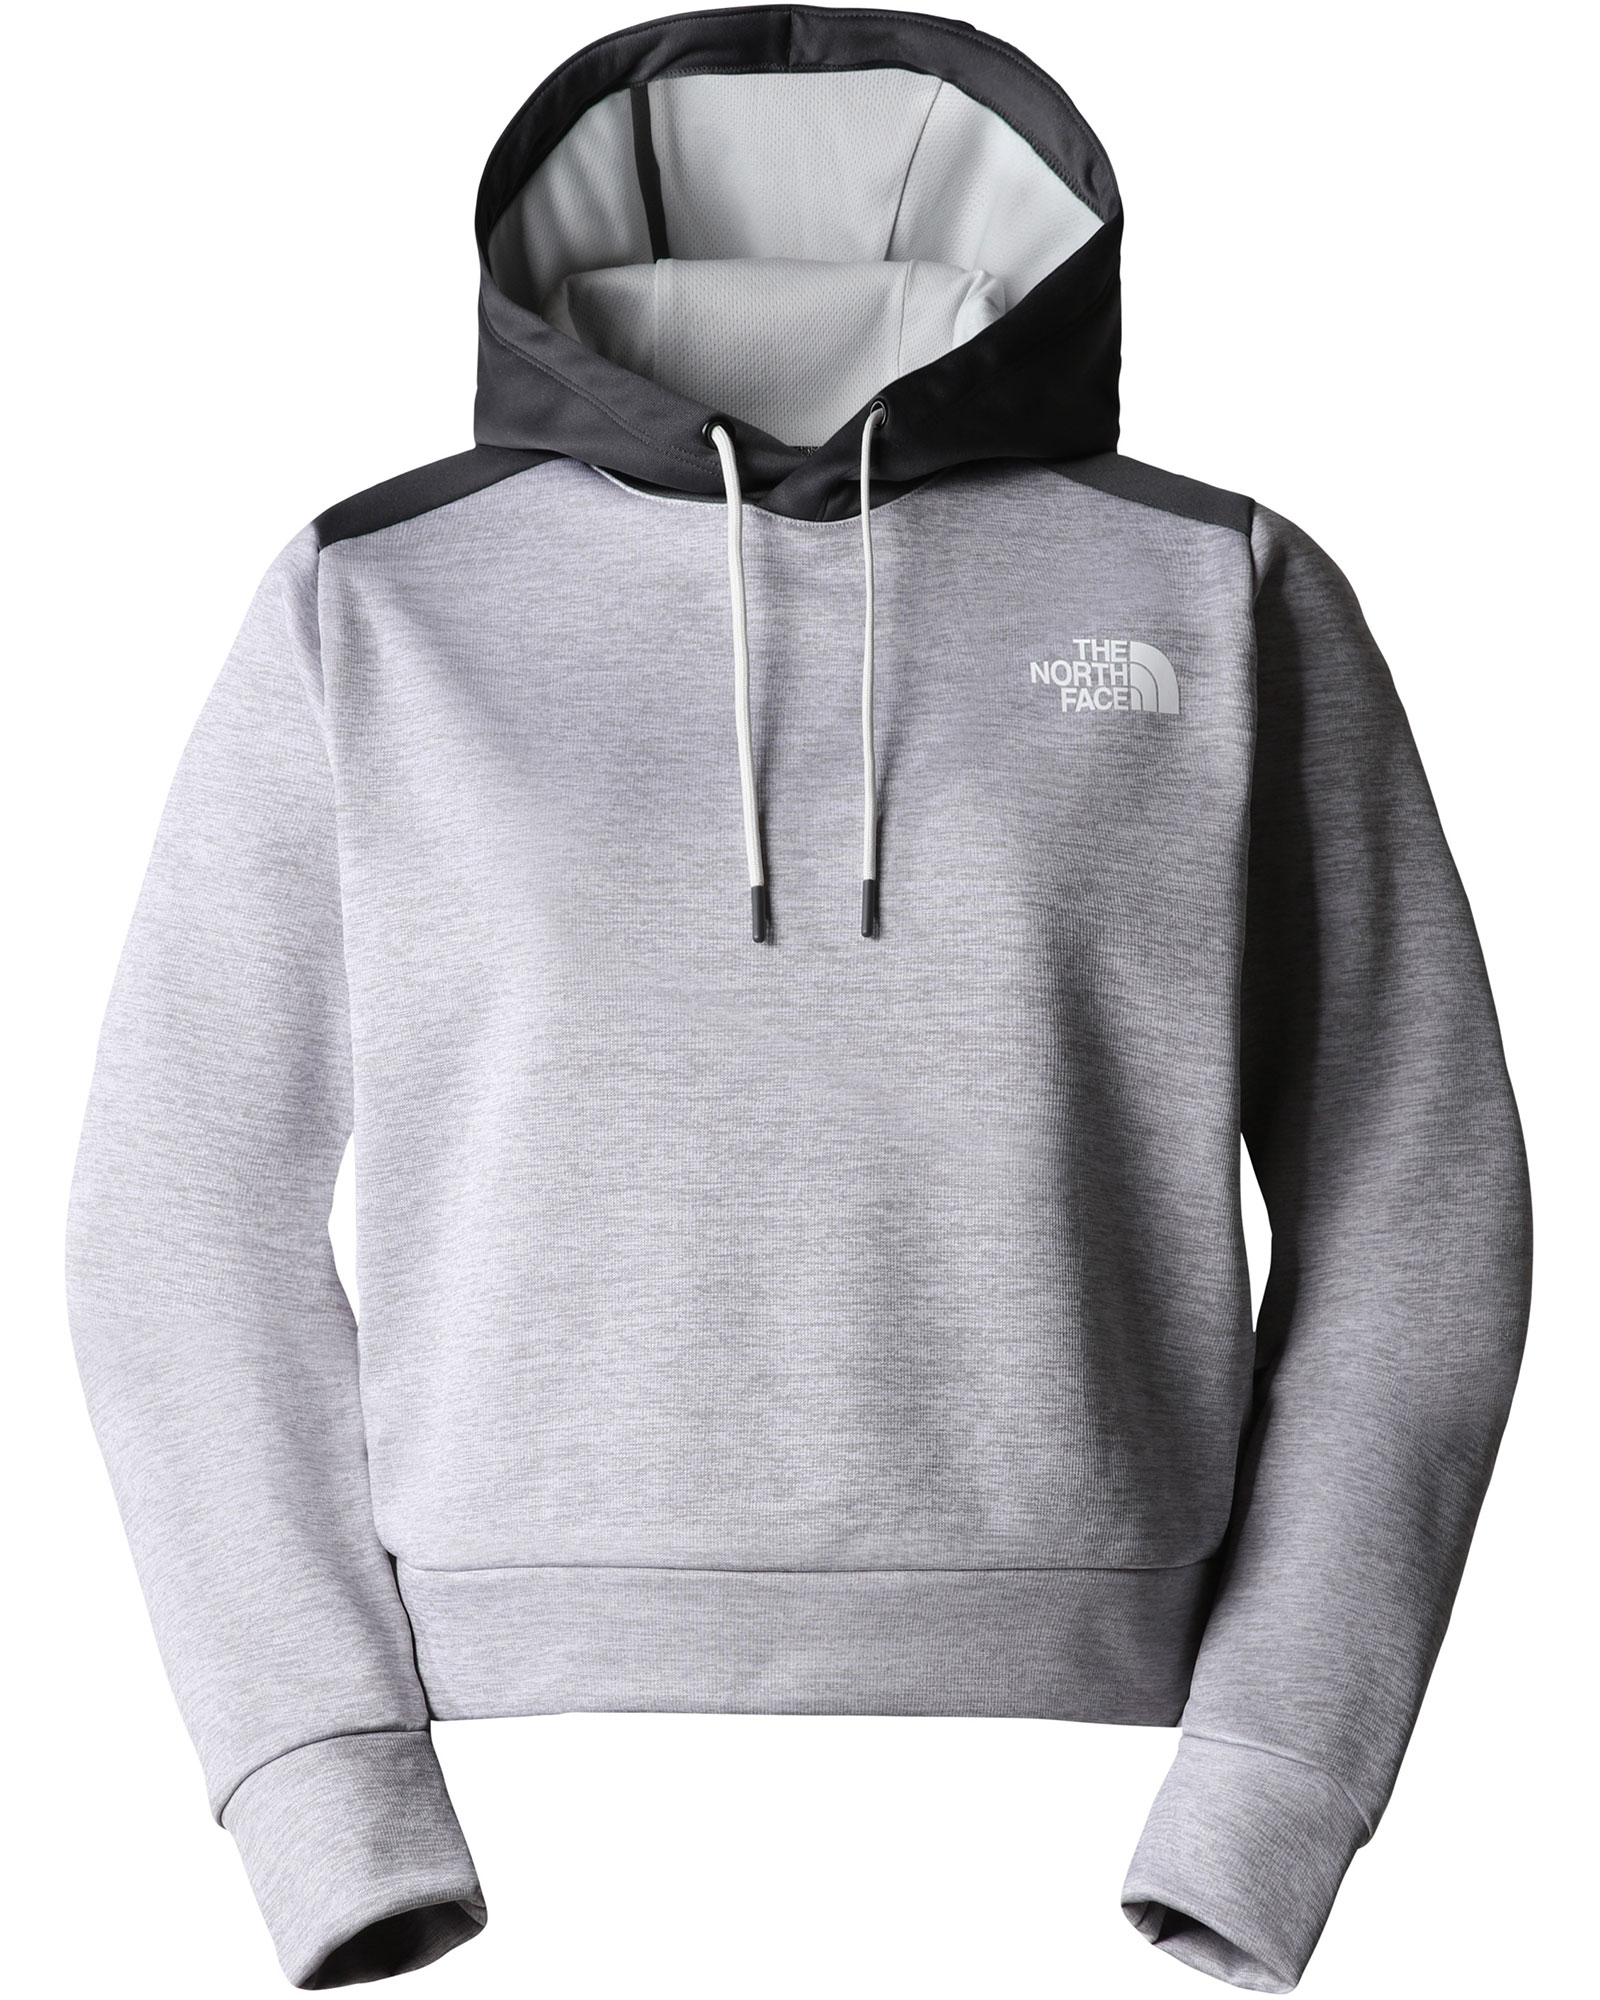 The North Face Reaxion Women’s Fleece Pullover Hoodie - TNF Light Grey Heather L